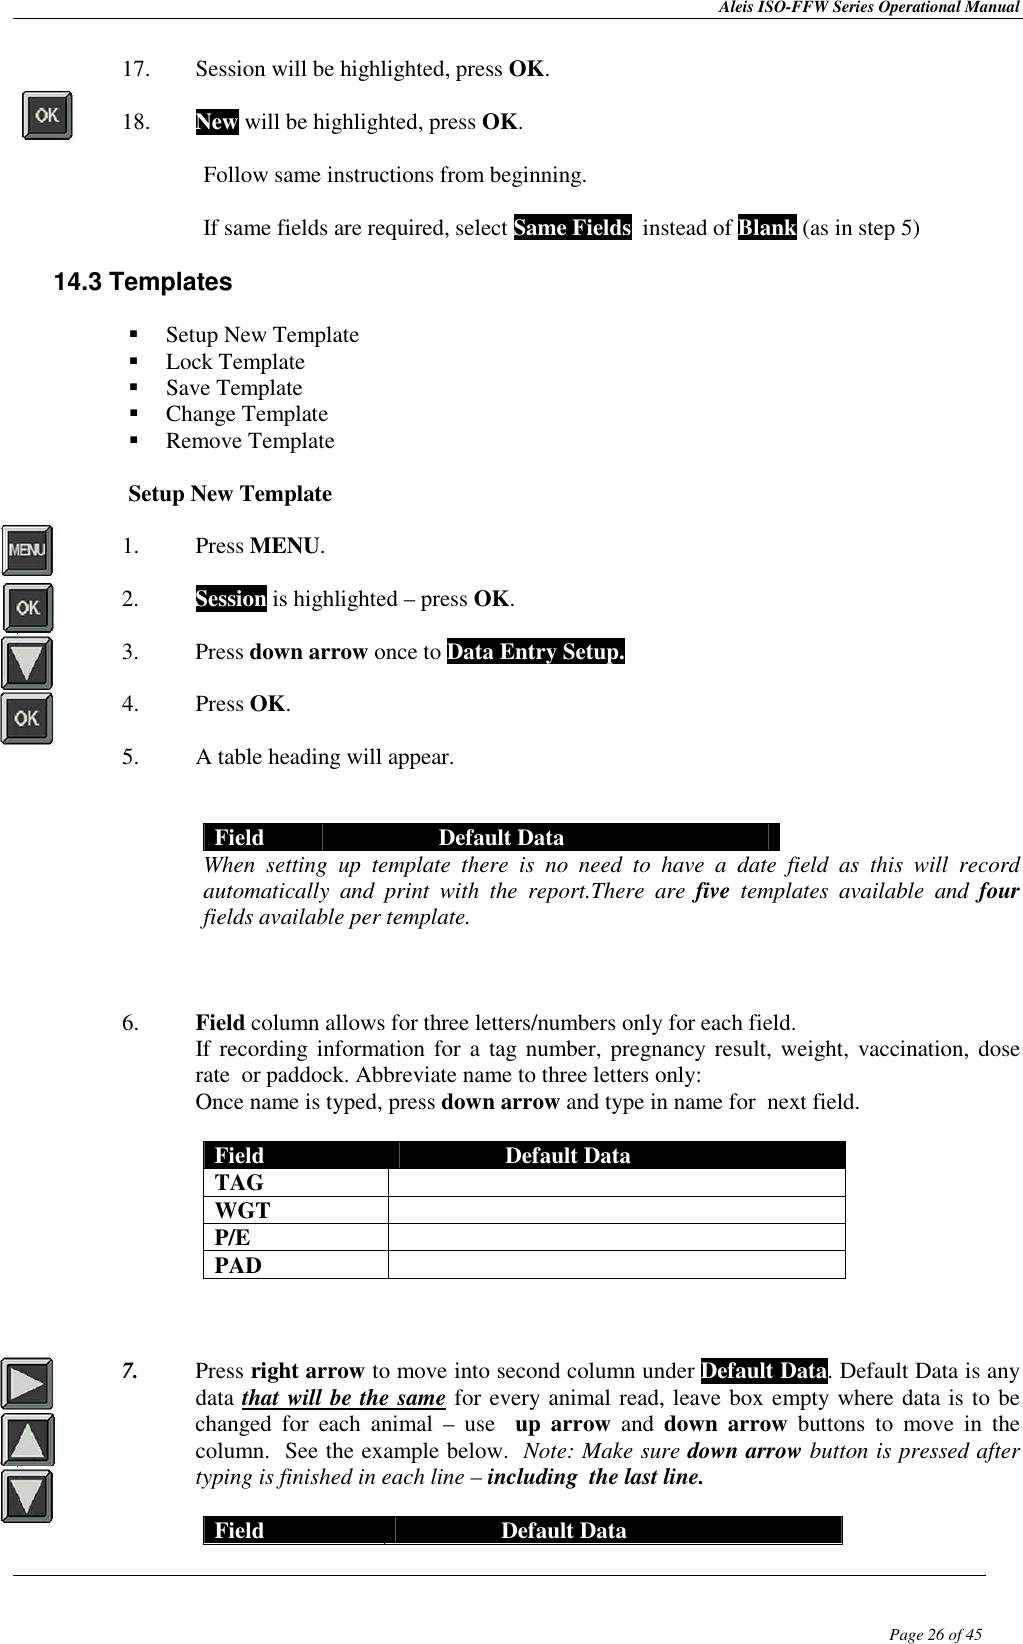 Aleis ISO-FFW Series Operational Manual  Page 26 of 45 17. Session will be highlighted, press OK.  18. New will be highlighted, press OK.  Follow same instructions from beginning.  If same fields are required, select Same Fields  instead of Blank (as in step 5)  14.3 Templates    Setup New Template  Lock Template  Save Template  Change Template  Remove Template  Setup New Template  1. Press MENU.  2. Session is highlighted – press OK.  3. Press down arrow once to Data Entry Setup.  4. Press OK.  5. A table heading will appear.    Field  Default Data When  setting  up  template  there  is  no  need  to  have  a  date  field  as  this  will  record automatically  and  print  with  the  report.There  are  five  templates  available  and  four fields available per template.    6. Field column allows for three letters/numbers only for each field.   If recording information for  a  tag number,  pregnancy result, weight, vaccination, dose rate  or paddock. Abbreviate name to three letters only:  Once name is typed, press down arrow and type in name for  next field.  Field  Default Data TAG   WGT   P/E   PAD      7. Press right arrow to move into second column under Default Data. Default Data is any data that will be the same for every animal read, leave box empty where data is to be changed  for  each  animal  –  use    up  arrow  and  down  arrow  buttons  to  move  in  the column.  See the example below.  Note: Make sure down arrow button is pressed after typing is finished in each line – including  the last line.  Field  Default Data 